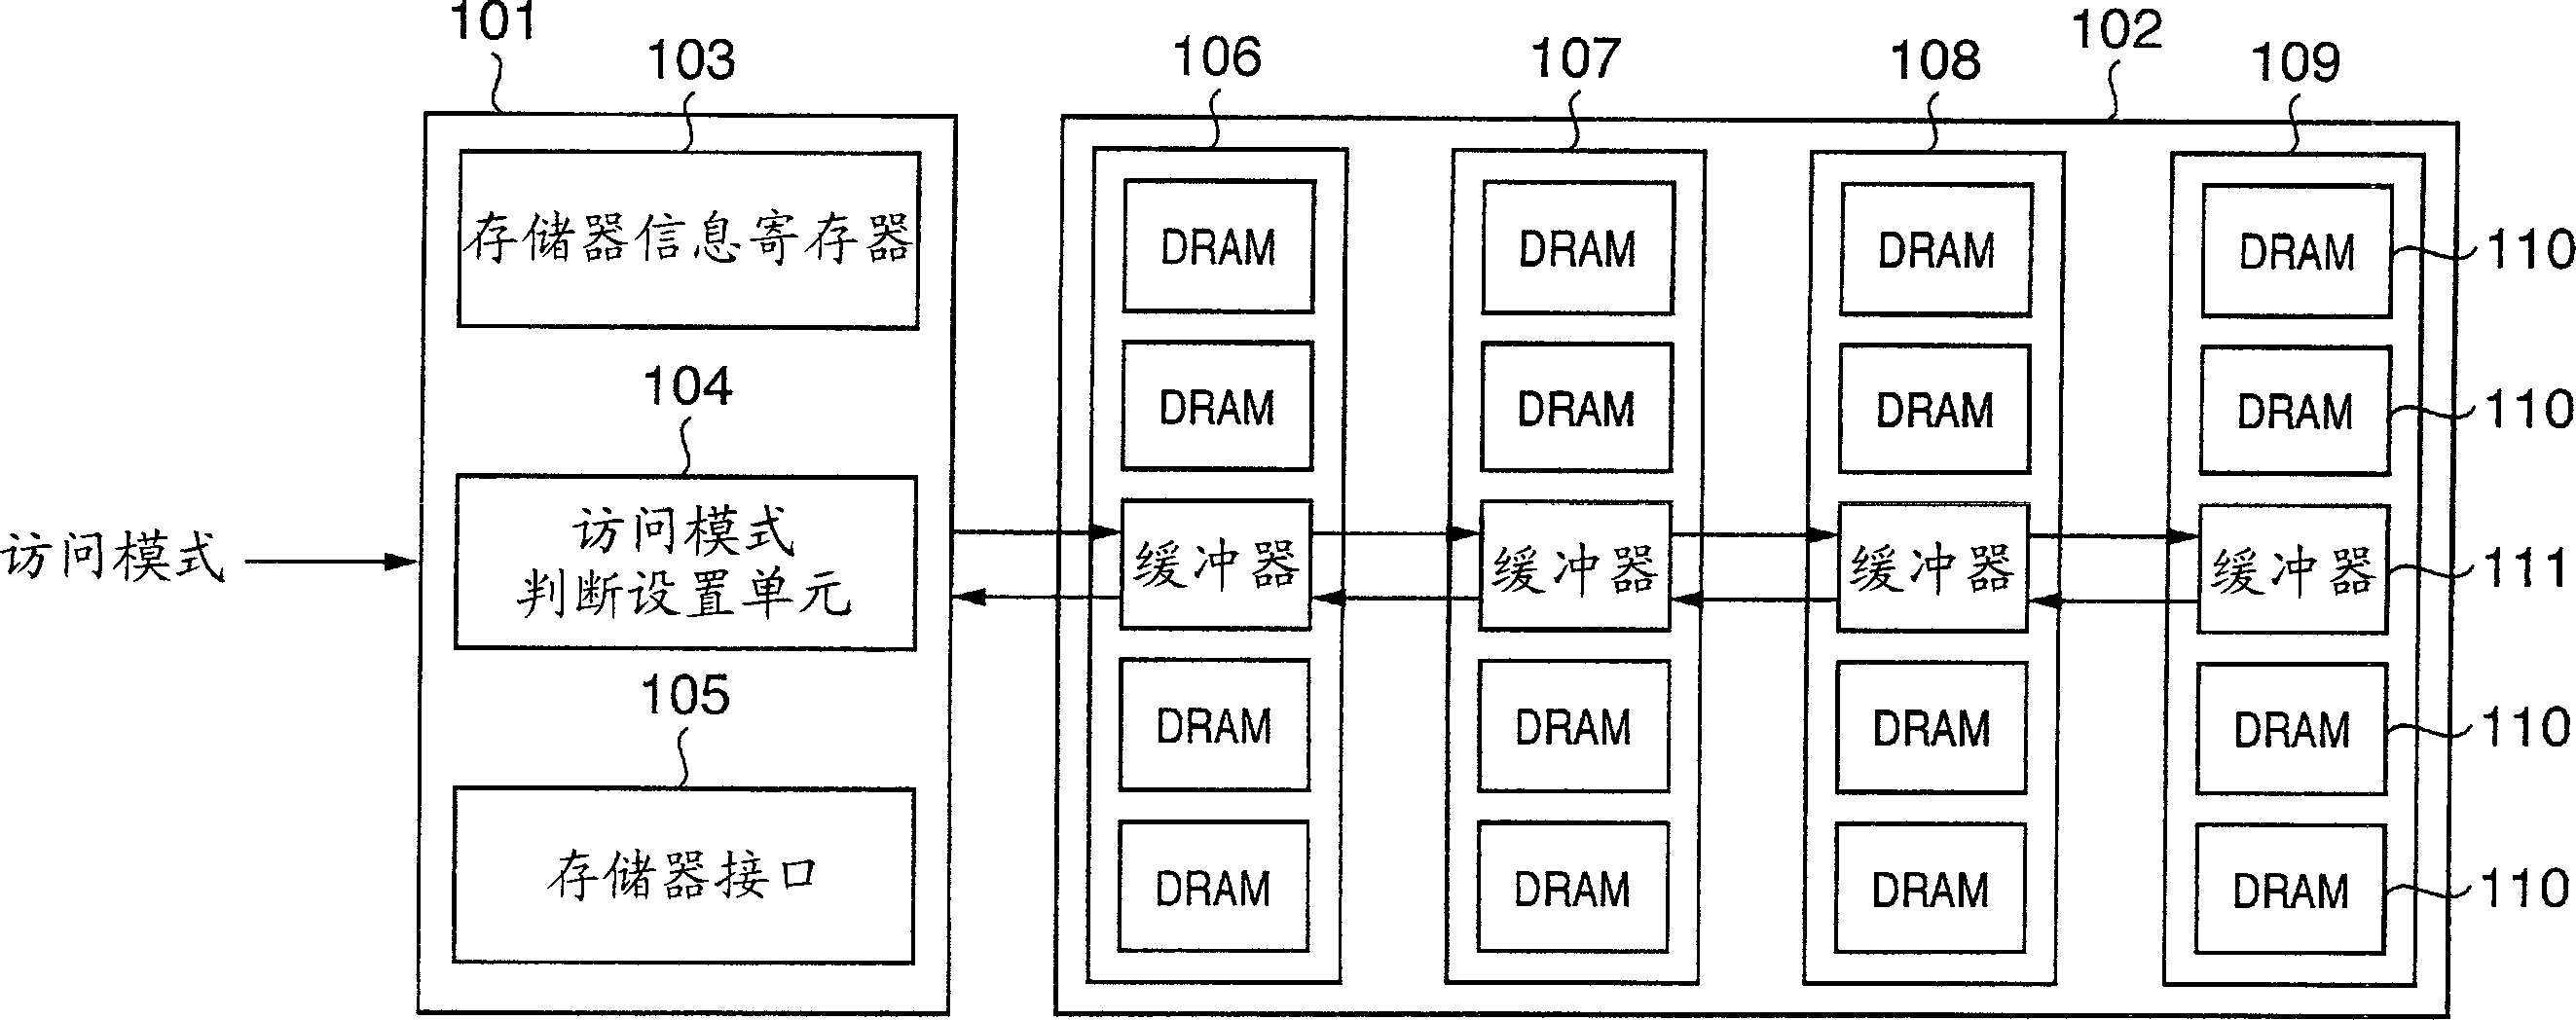 Access control device, method for changing memory addresses, and memory system